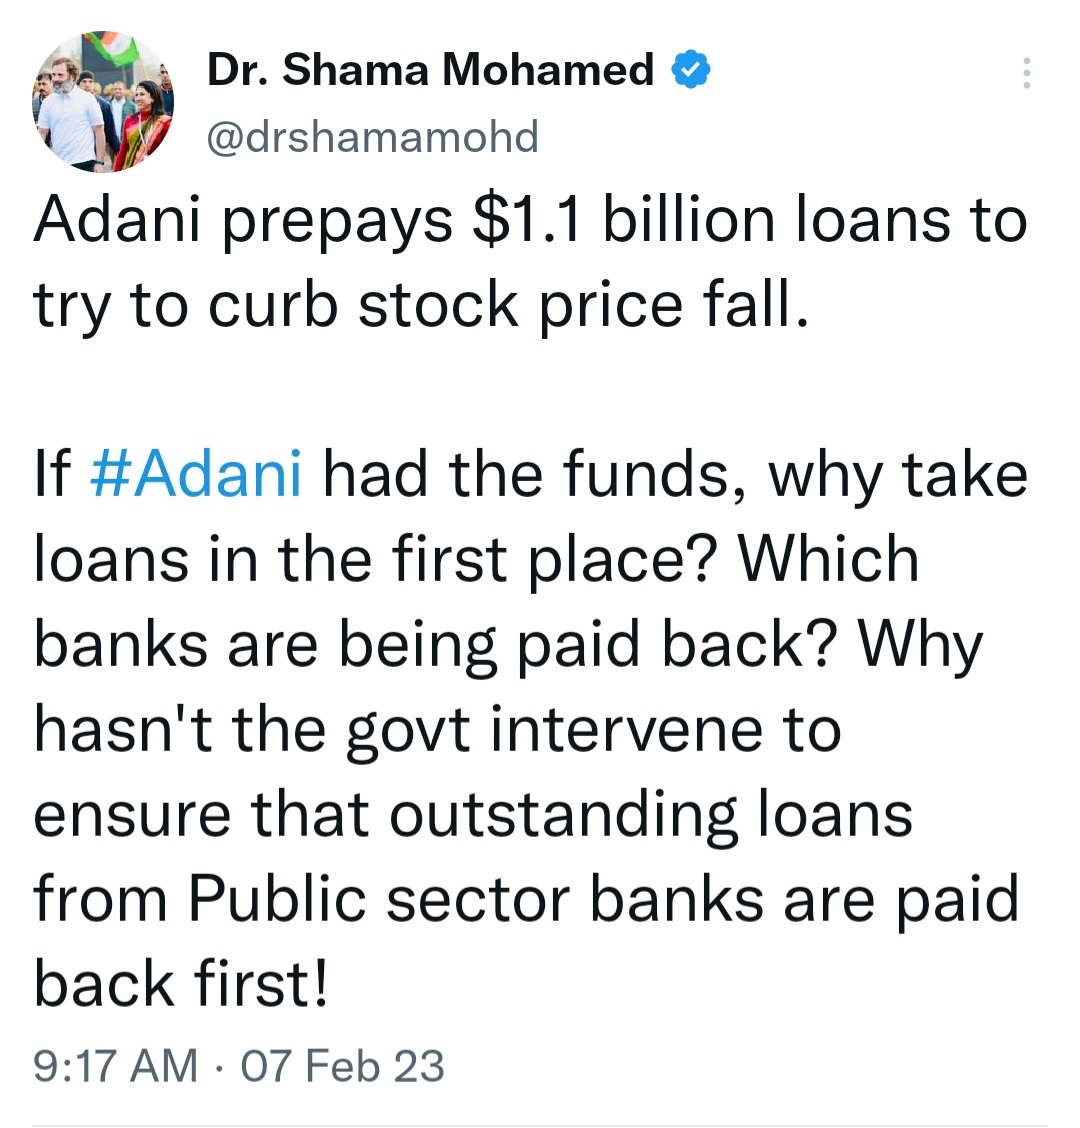 This has to be the dumbest tweet even dumber than trash spewed by #RahulGandhi in #LokSabha today

Most Congressis have no idea about how Banks work,how Stockmarkets work,how Bondmarkets work,how Margin money lending works,how loan against shares works
#AdaniGroup
#MadarsaGyaan👇